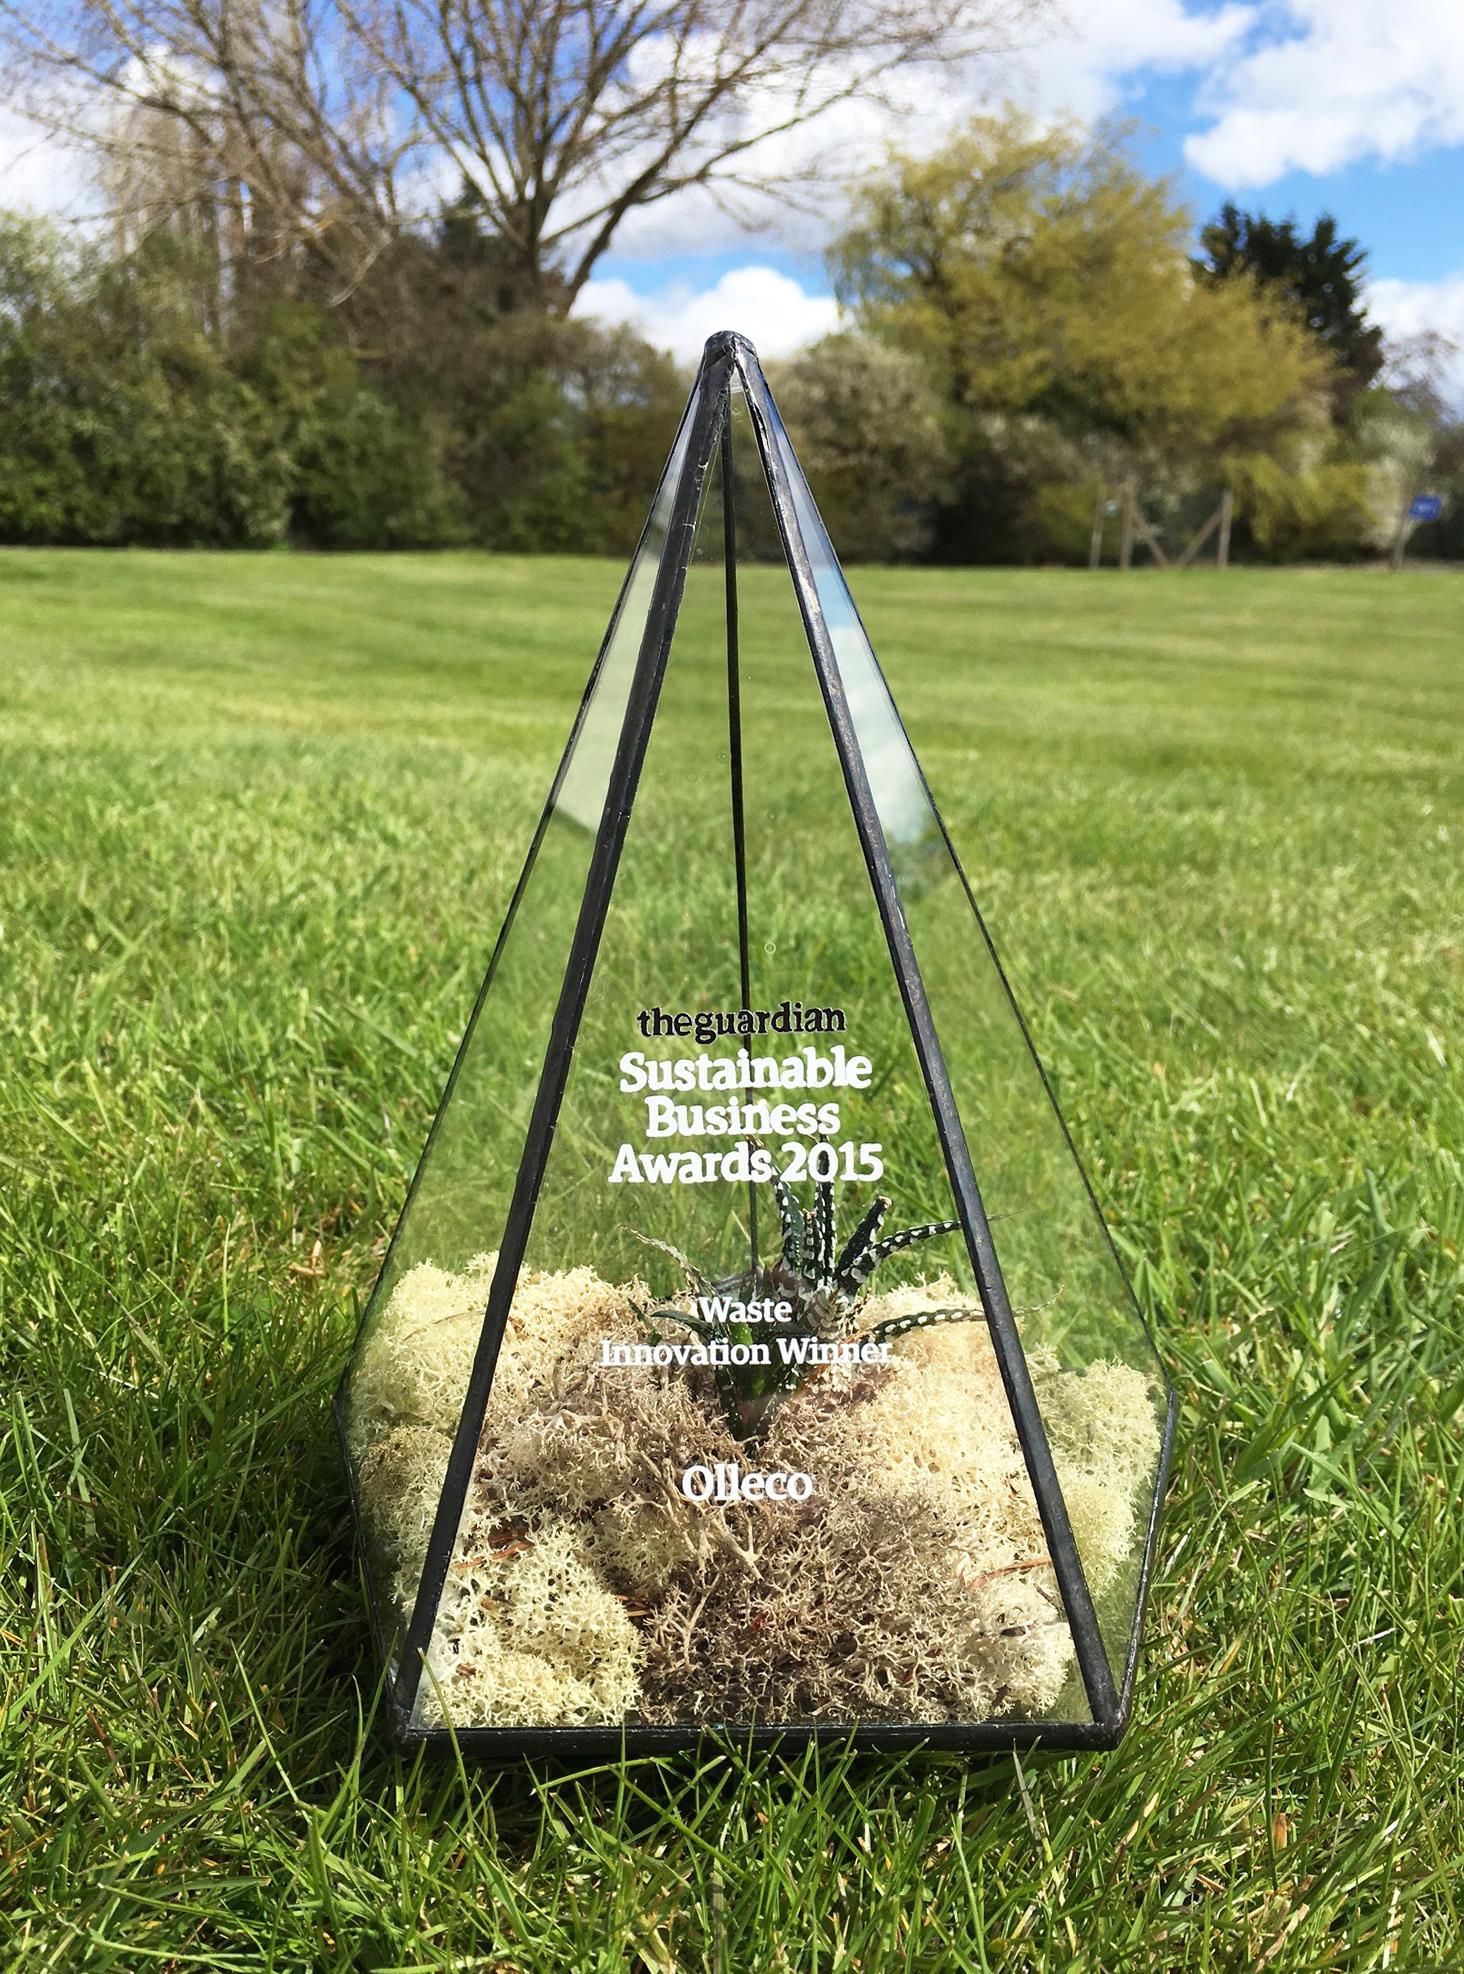 Olleco won the Guardian Sustainable Business award in 2015